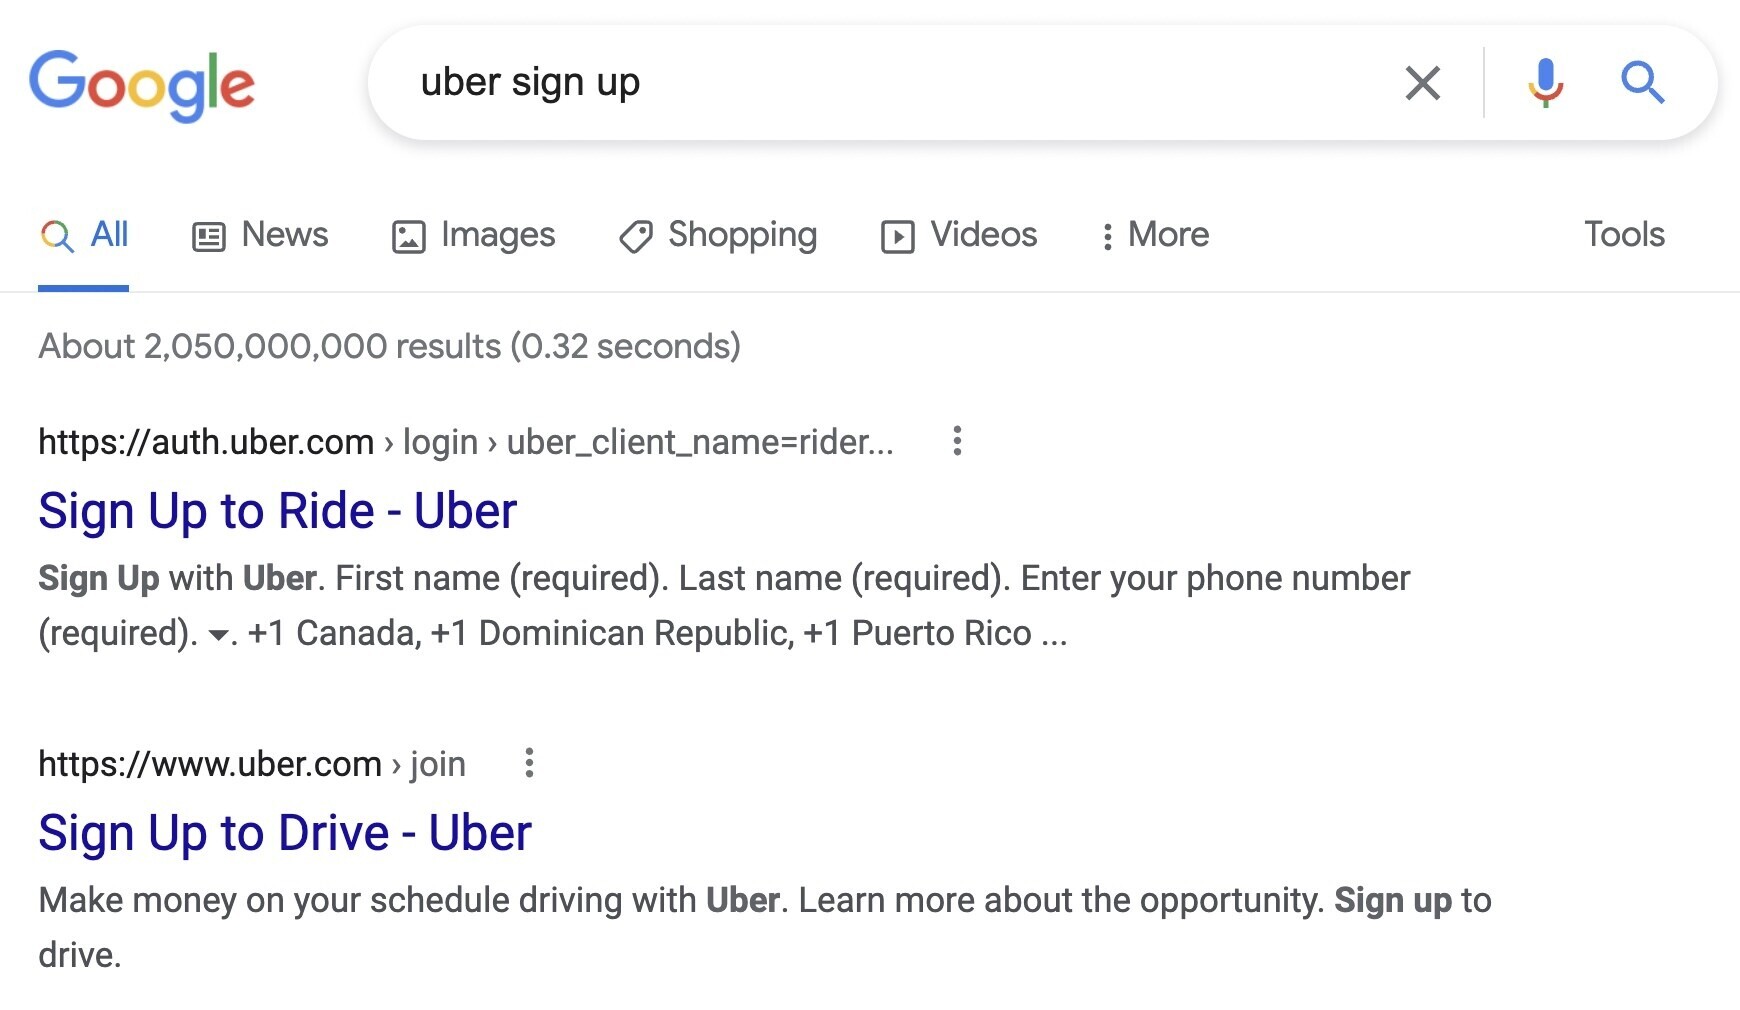 Google search for "uber sign up"